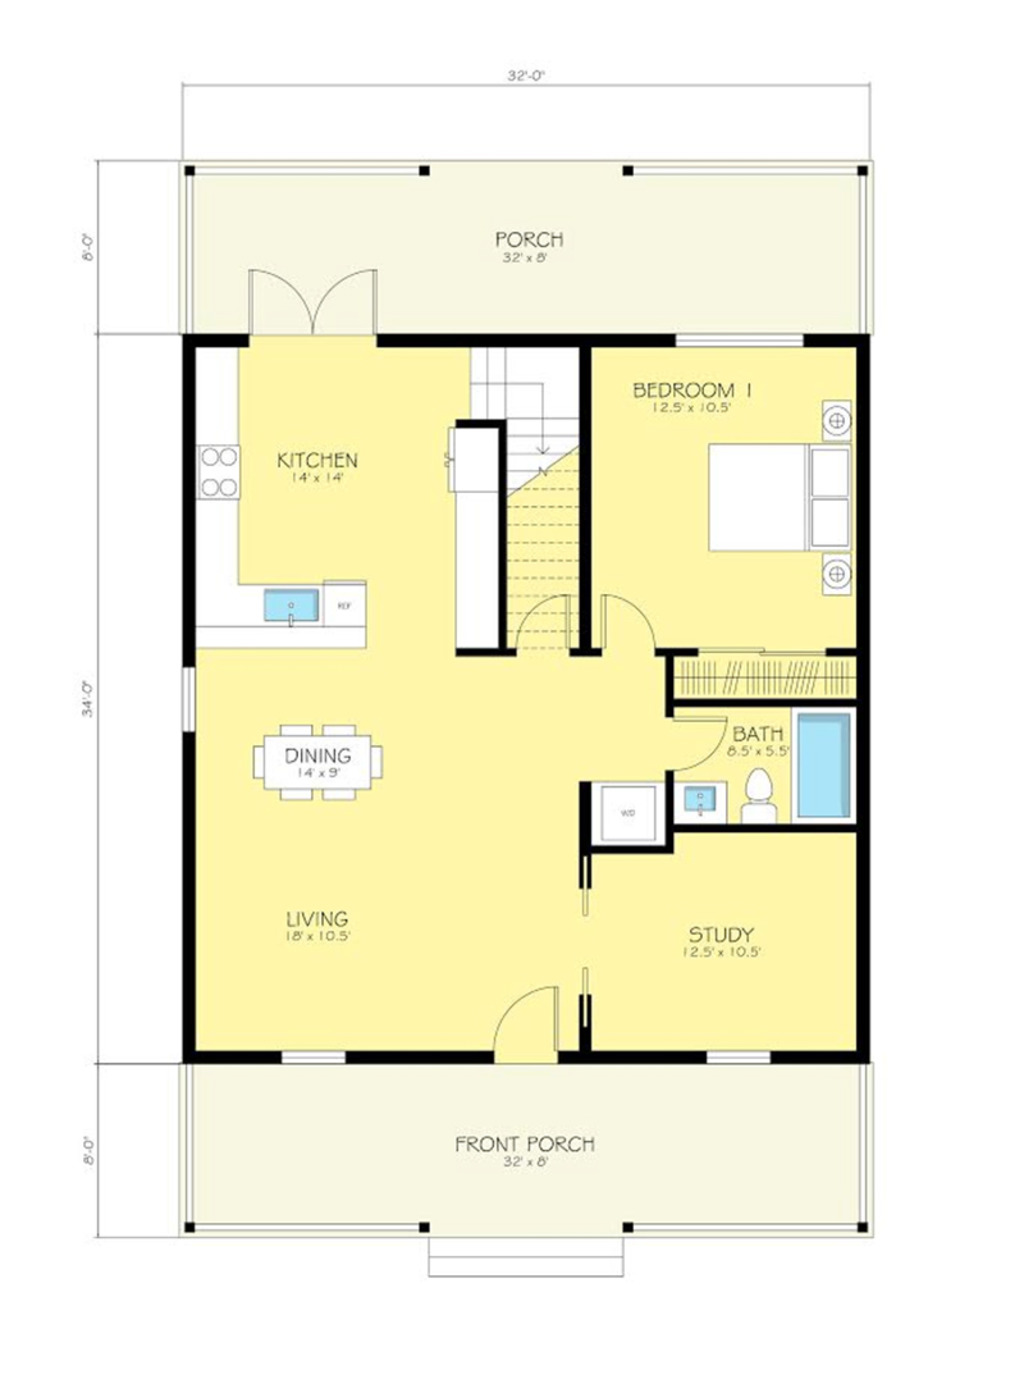 House Plan Drawing Simple - Two Bedroom Residential House Layout Plan ...